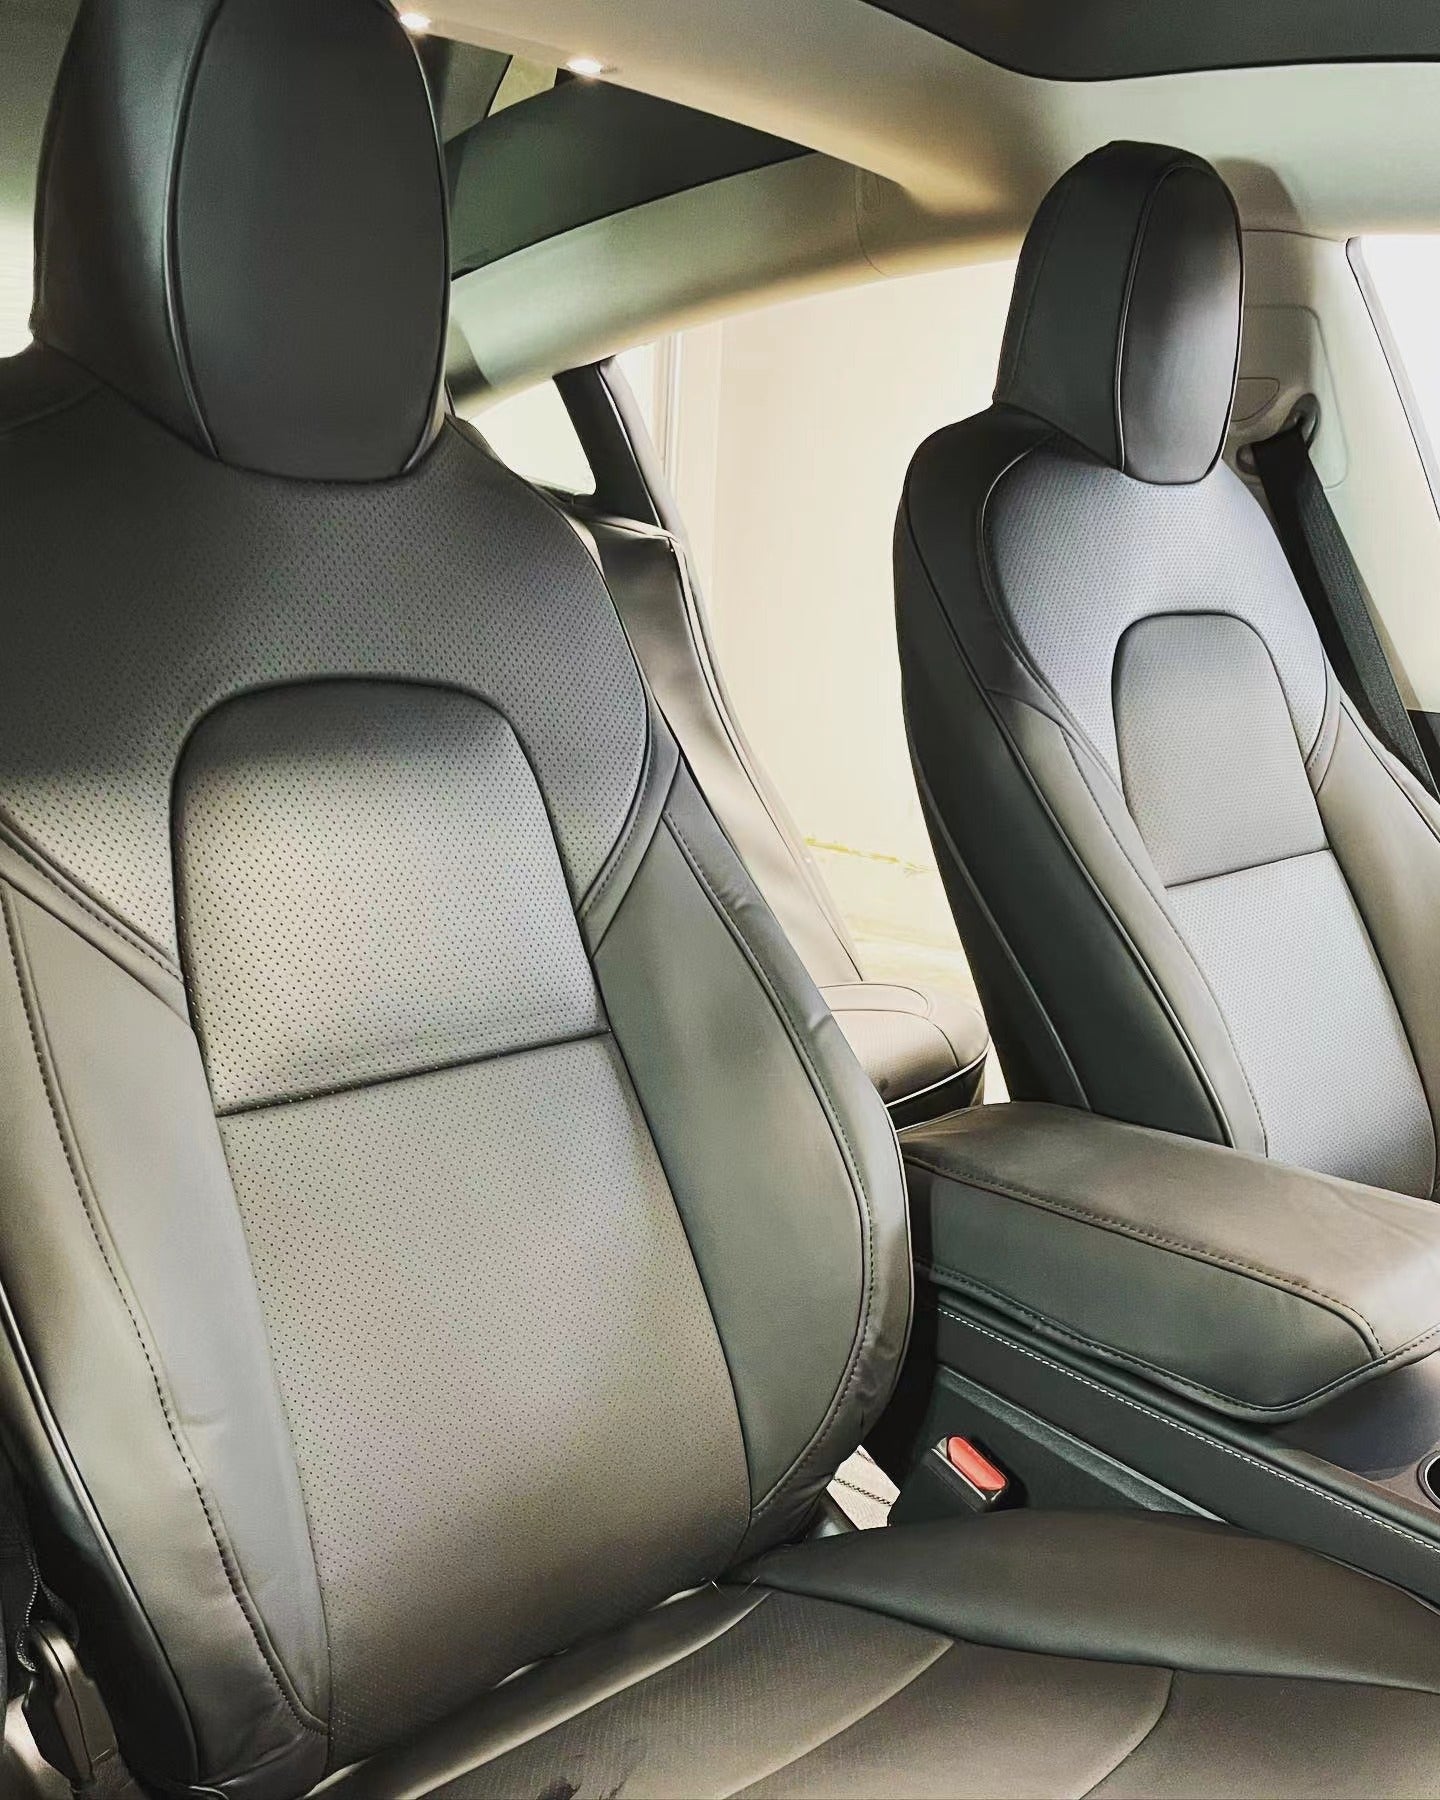 Model Y: PU Leather Full Seat Cover (12 PCs)